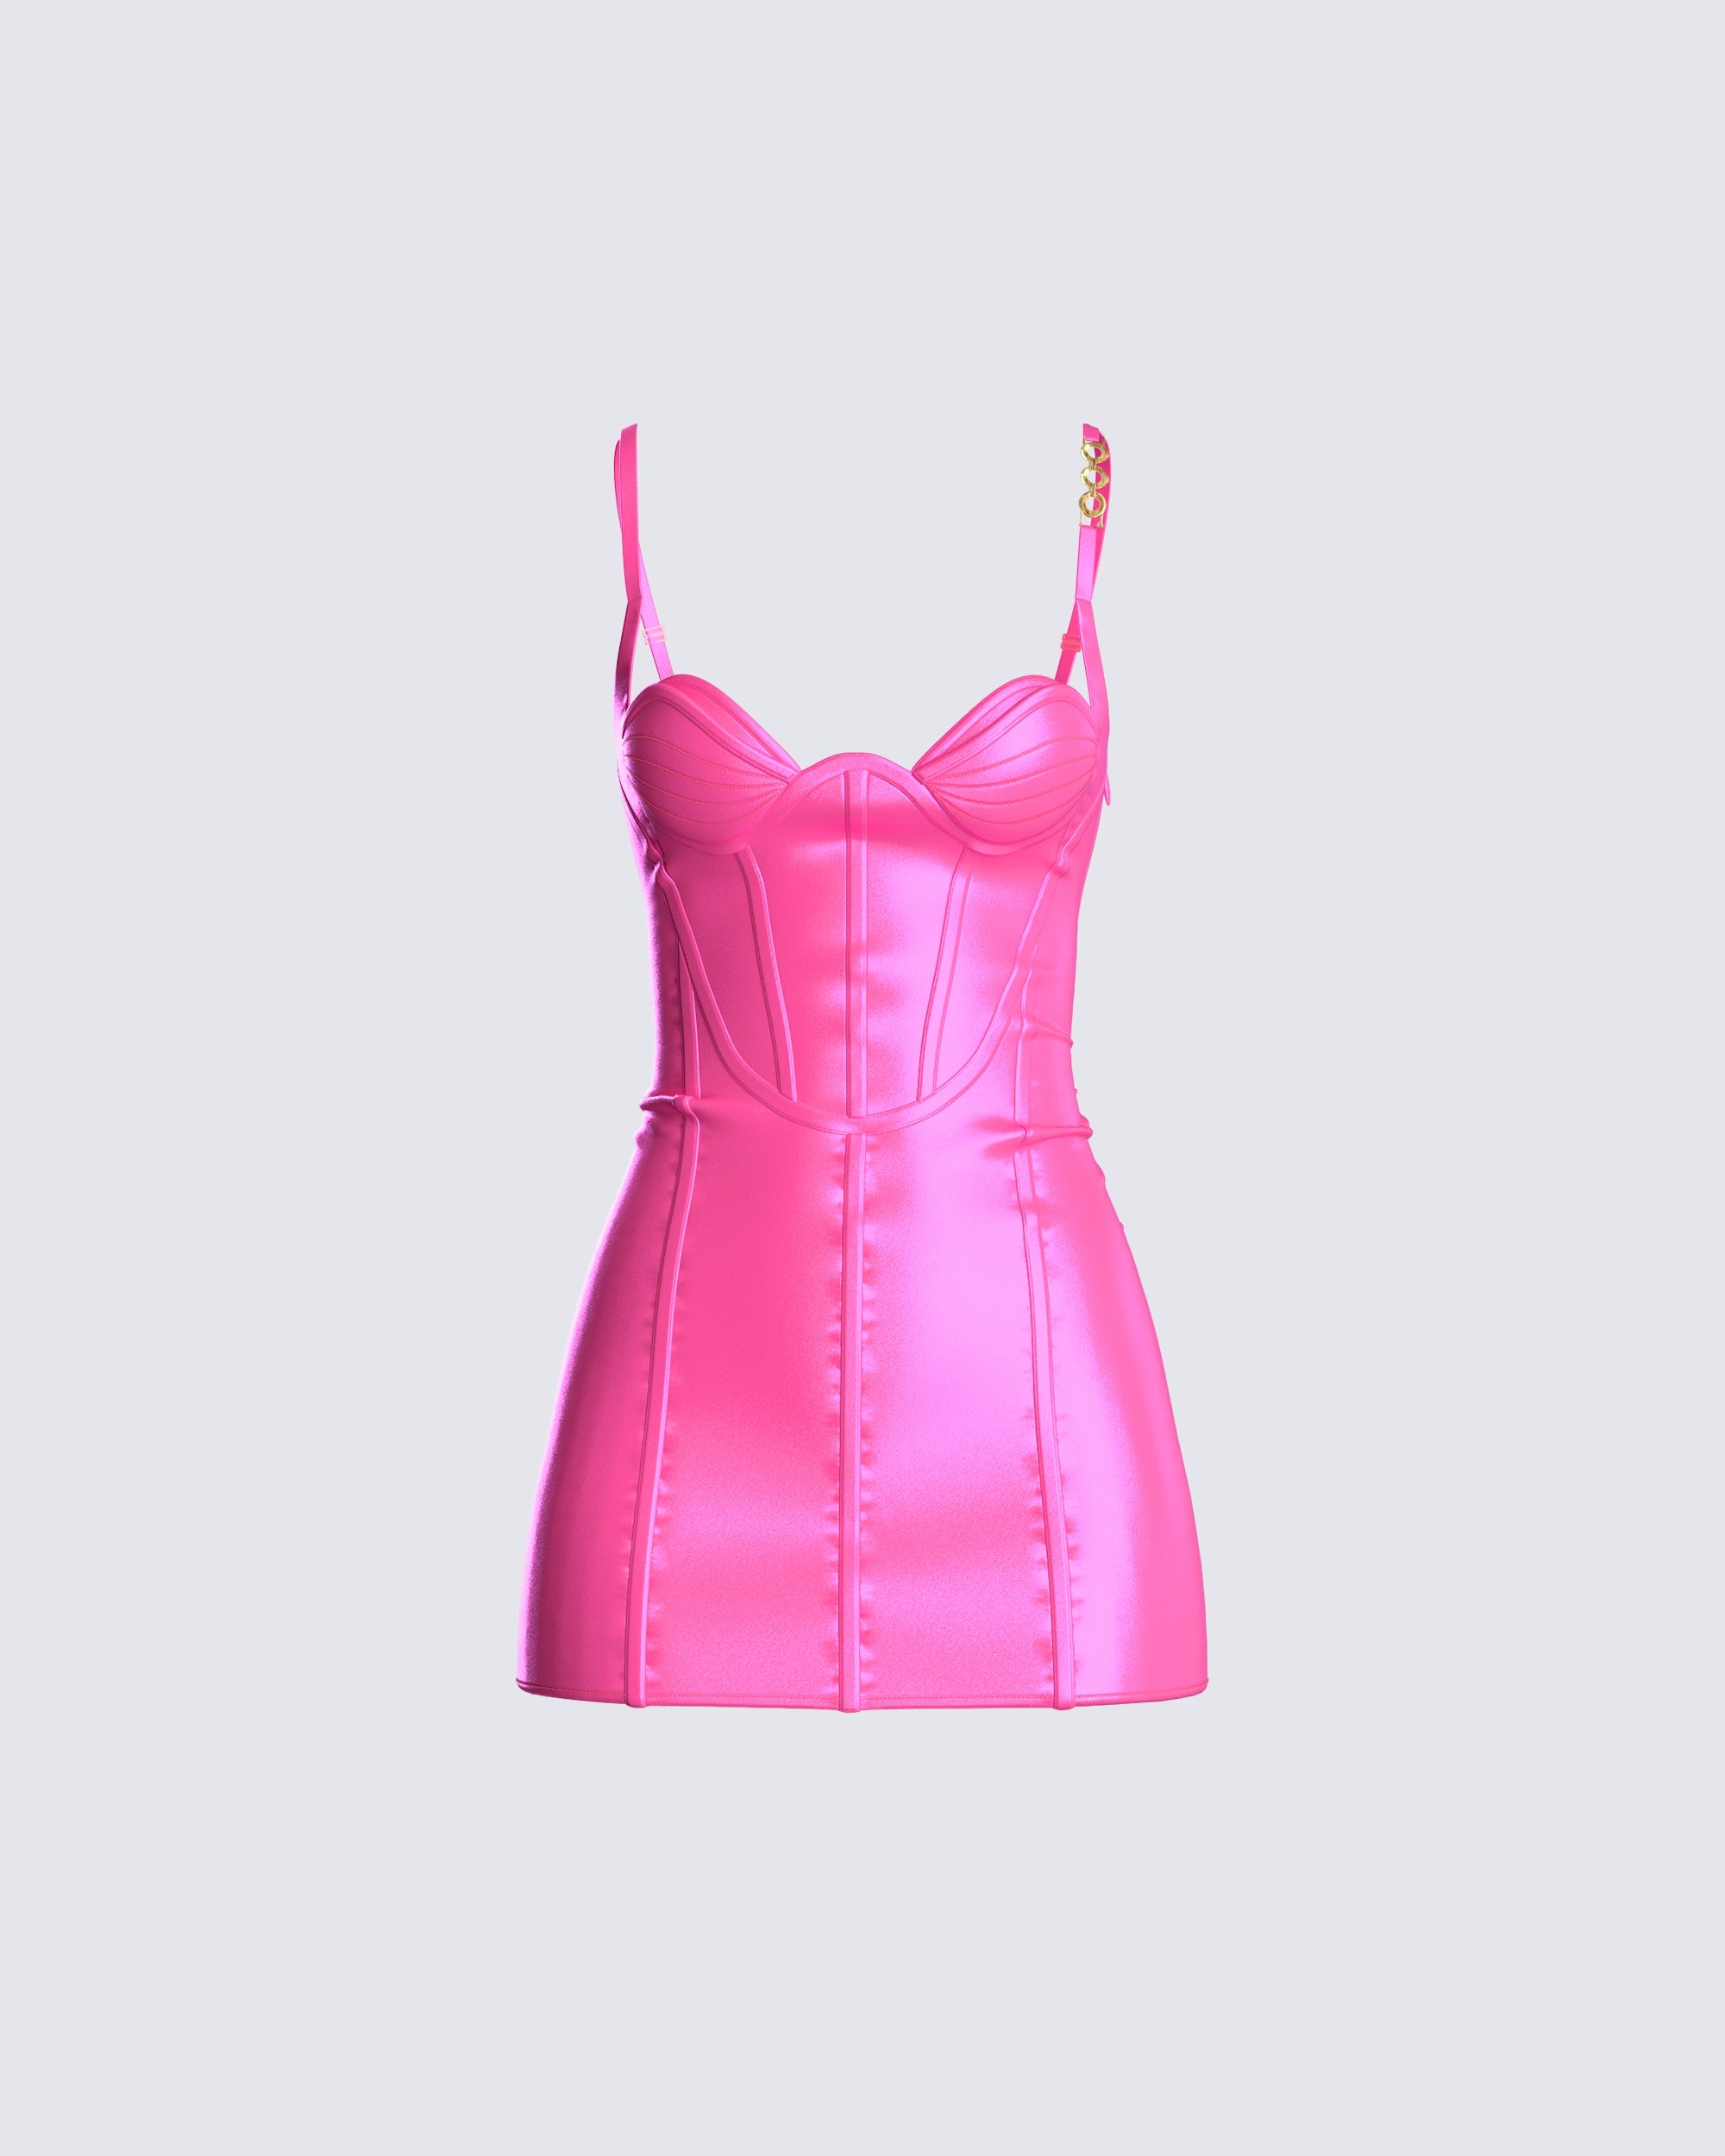 Buy BY.DYLN Montana Corset - Pink At 20% Off